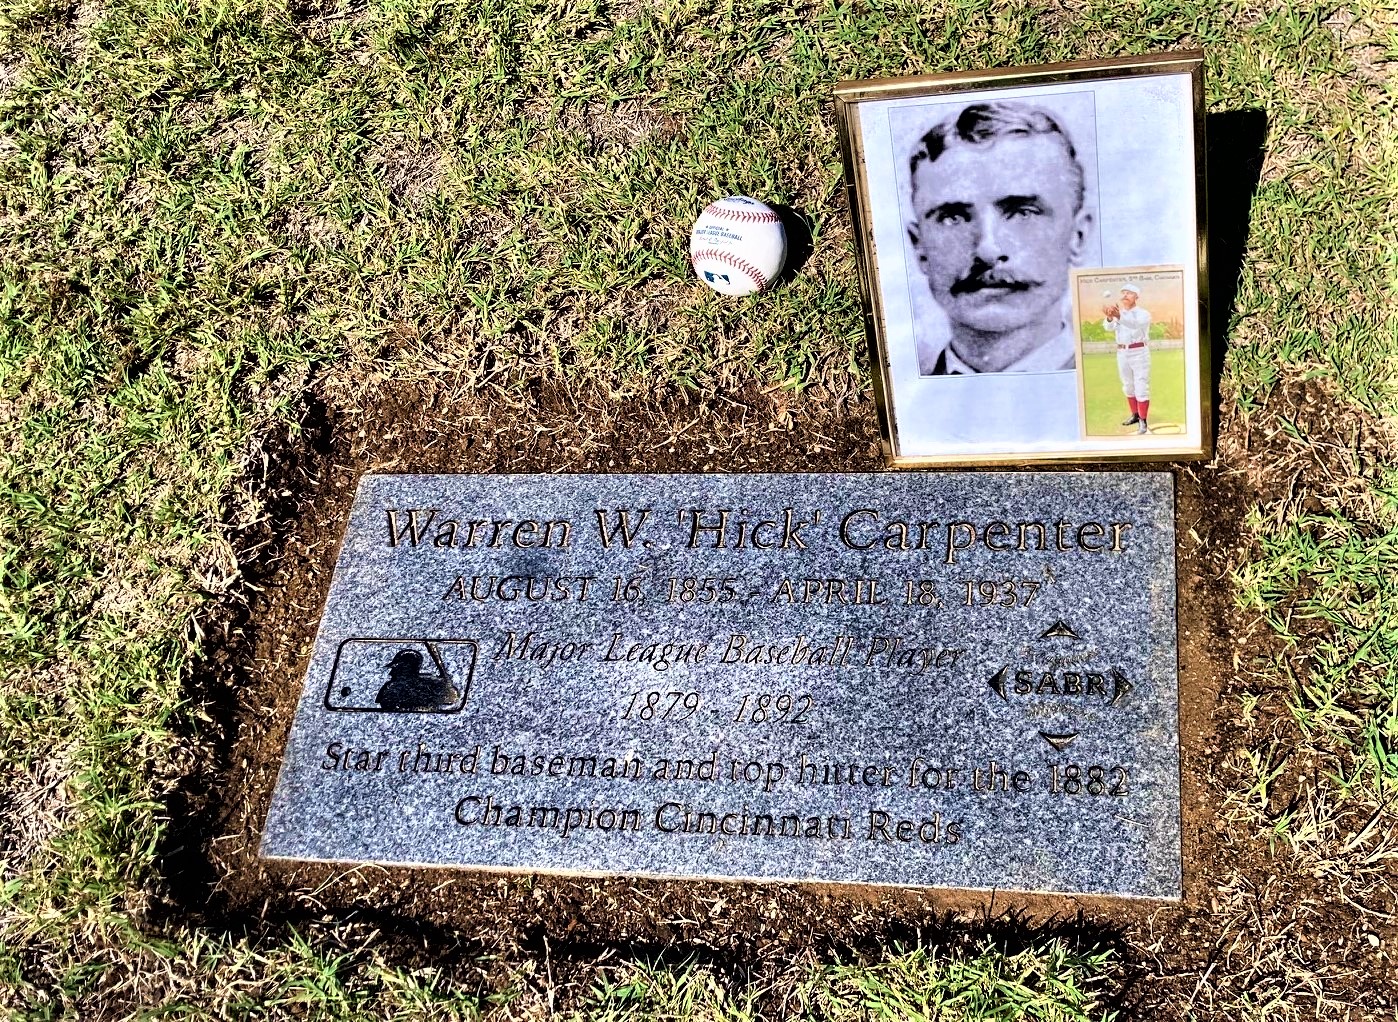 Hick Carpenter grave marker at Mt. Hope Cemetery in San Diego (COURTESY OF TOM LARWIN)